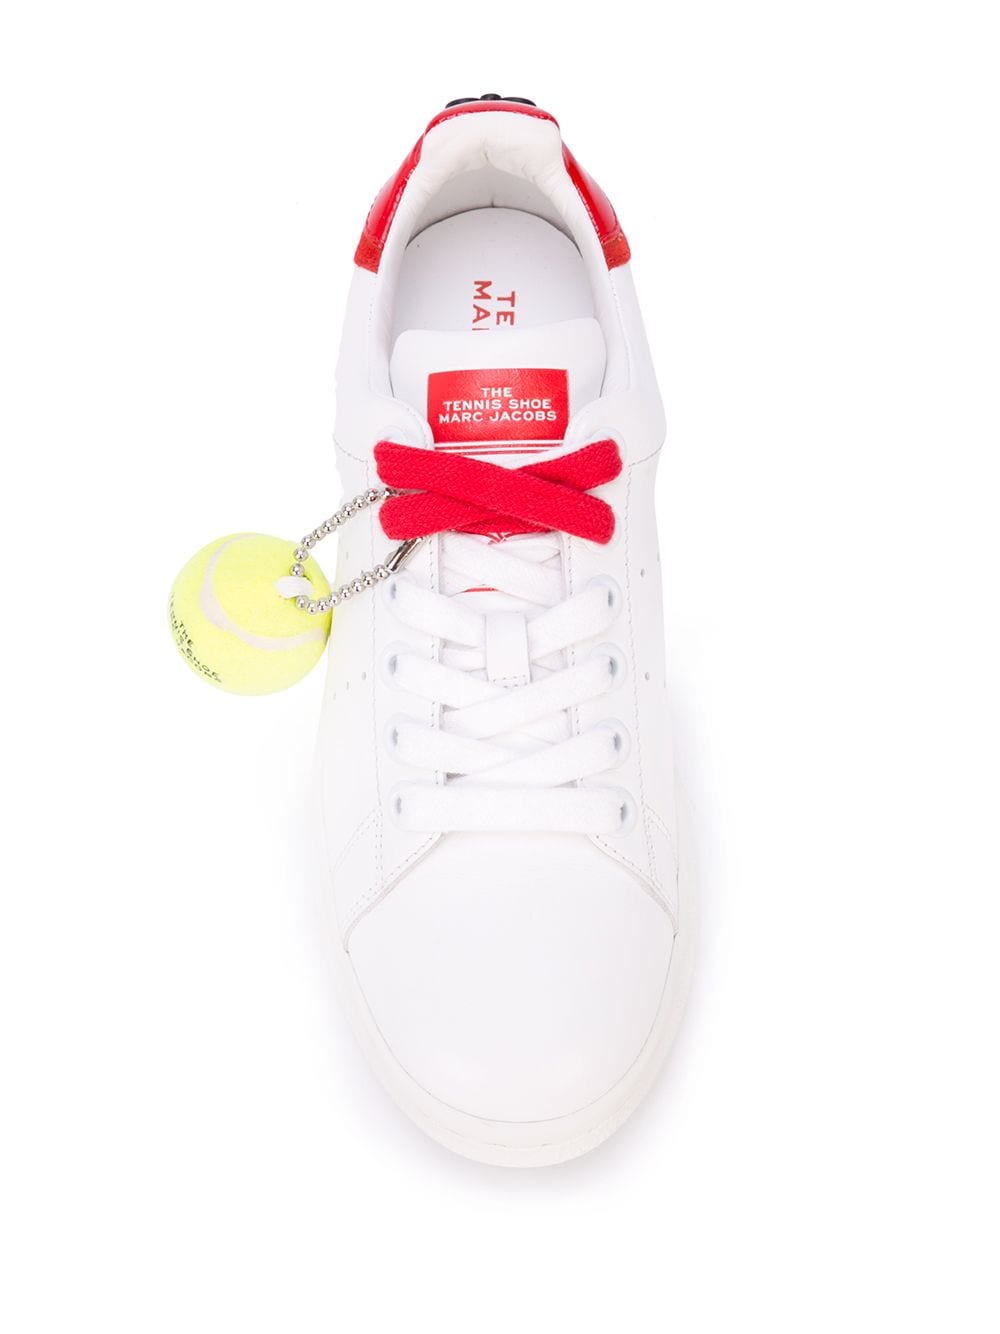 The Marc Jacobs 'The Tennis Shoes' Sneakers Size UK 4 = IT/EU 37